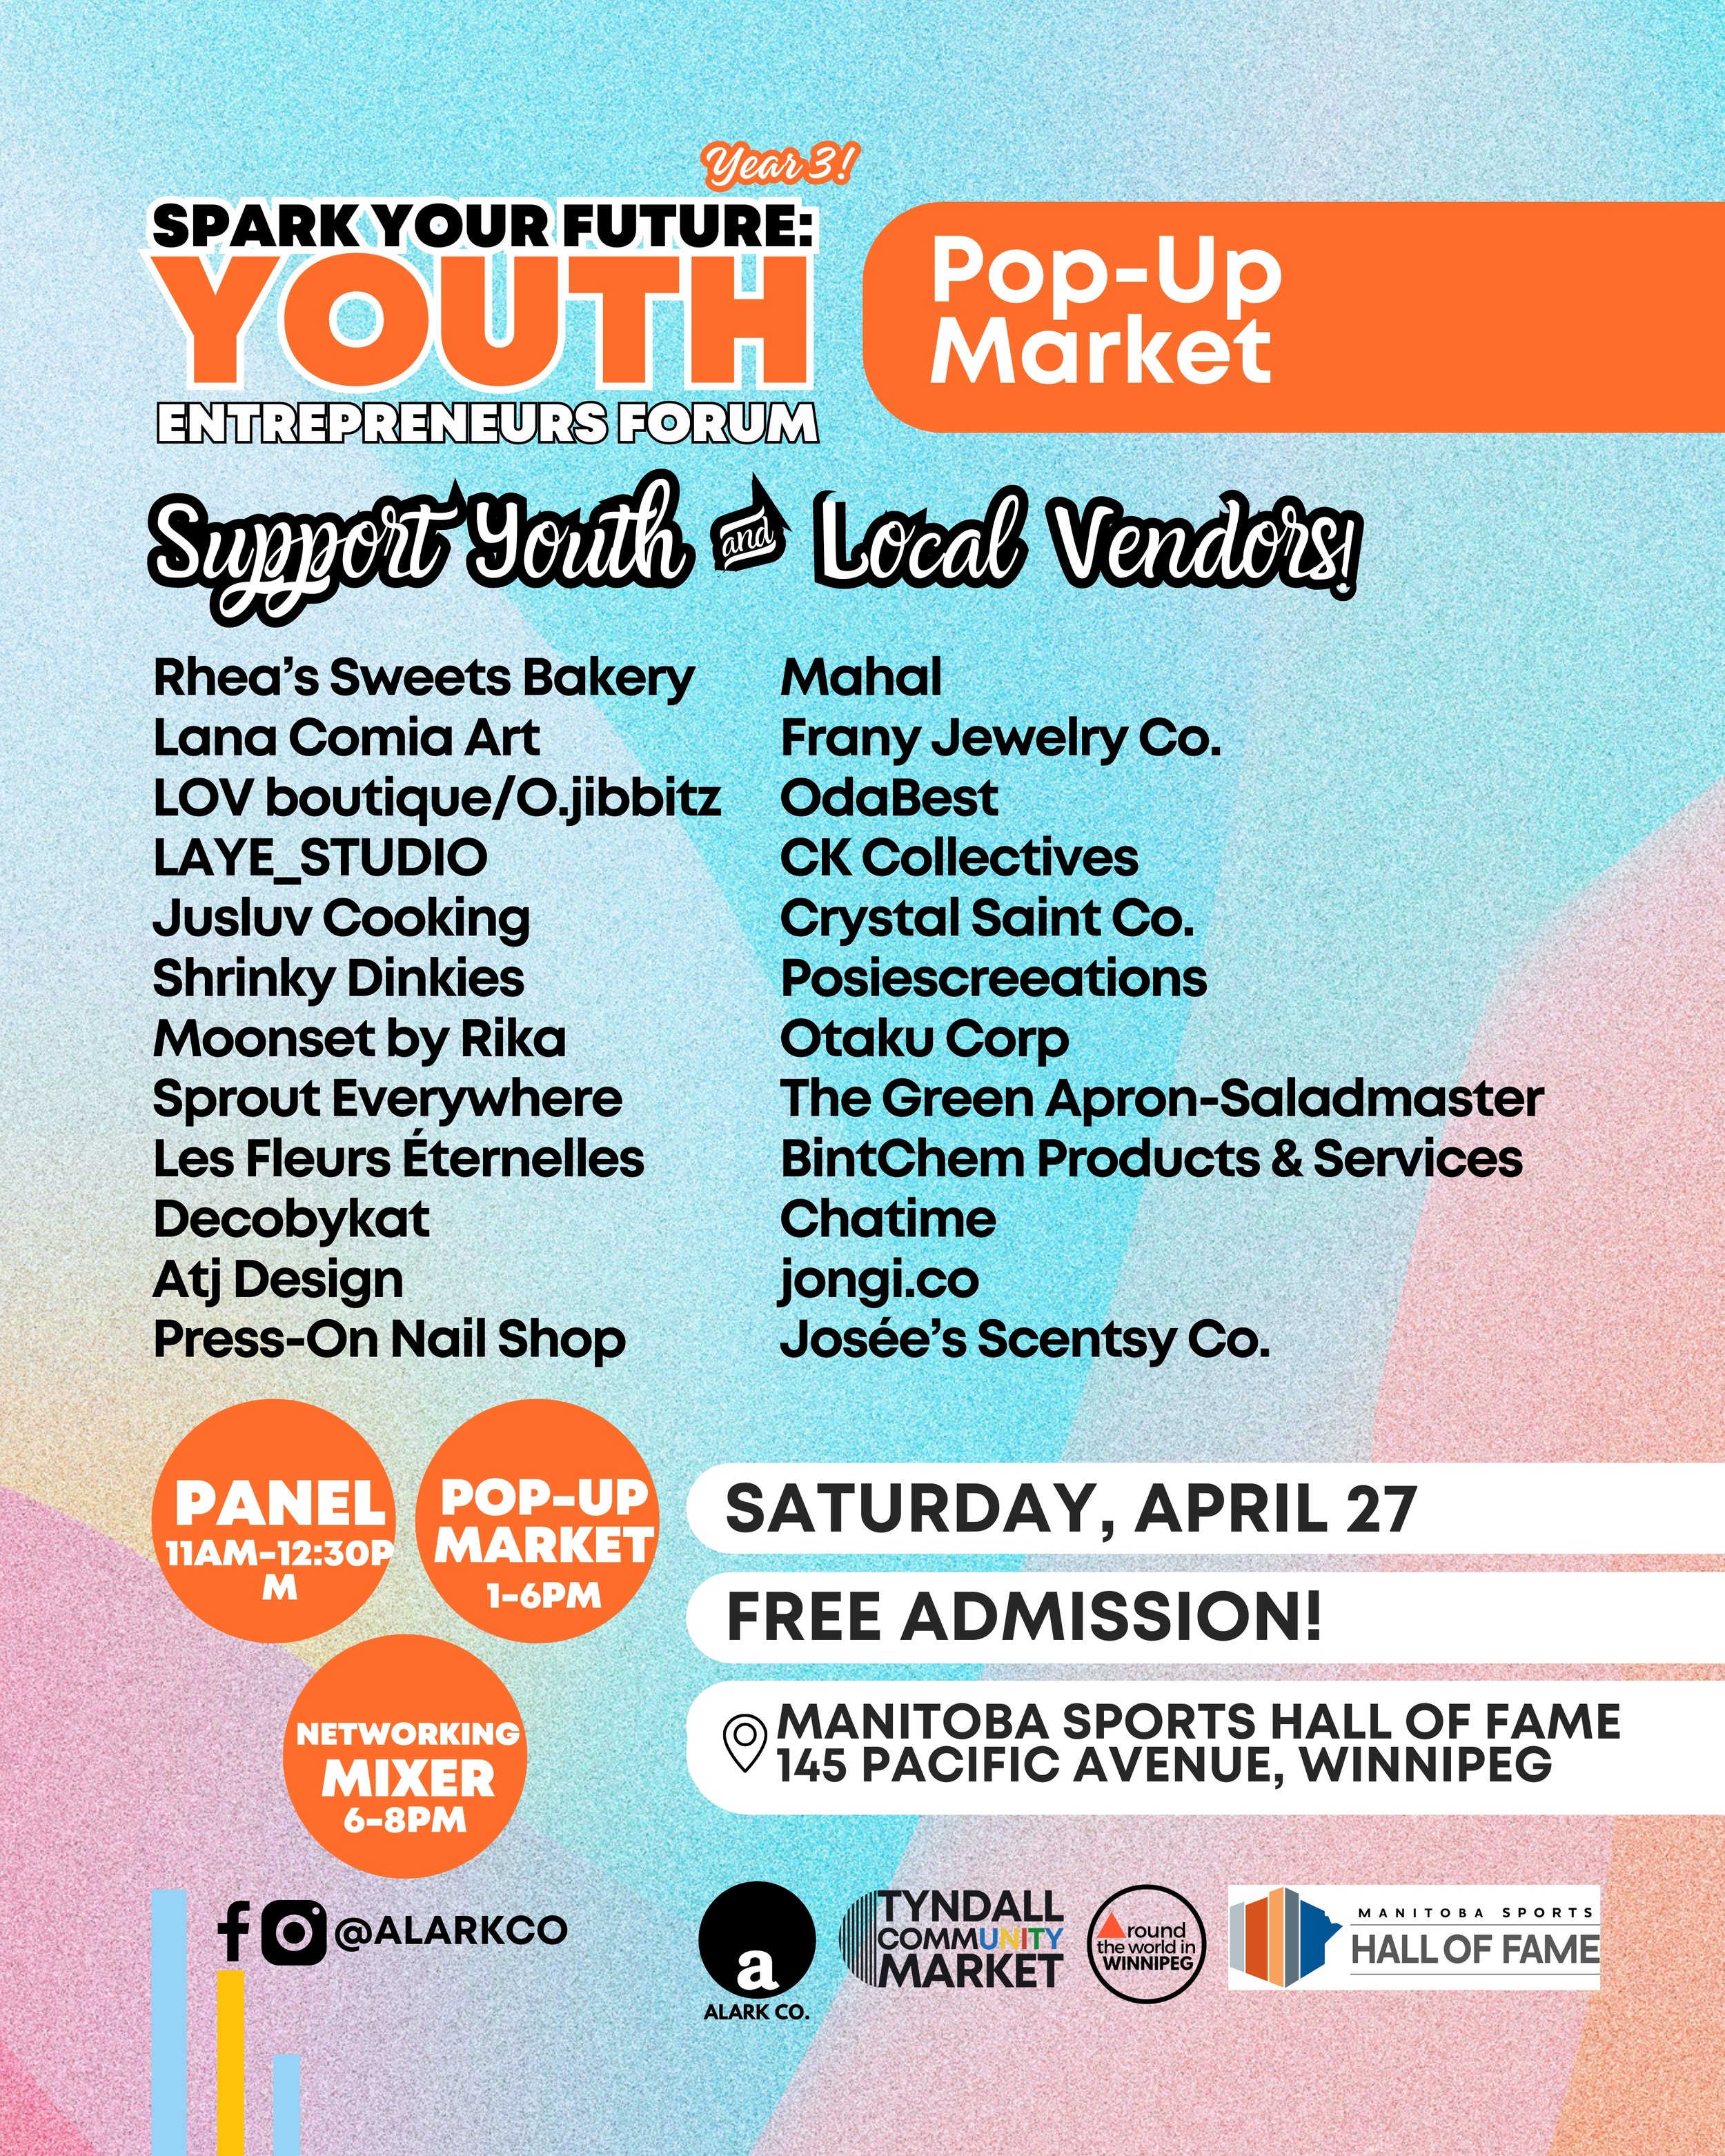 FEATURING TYNDALL COMMUNITY MARKET YOUTH ENTREPRENEURS AND SUPPORTERS (11).jpg